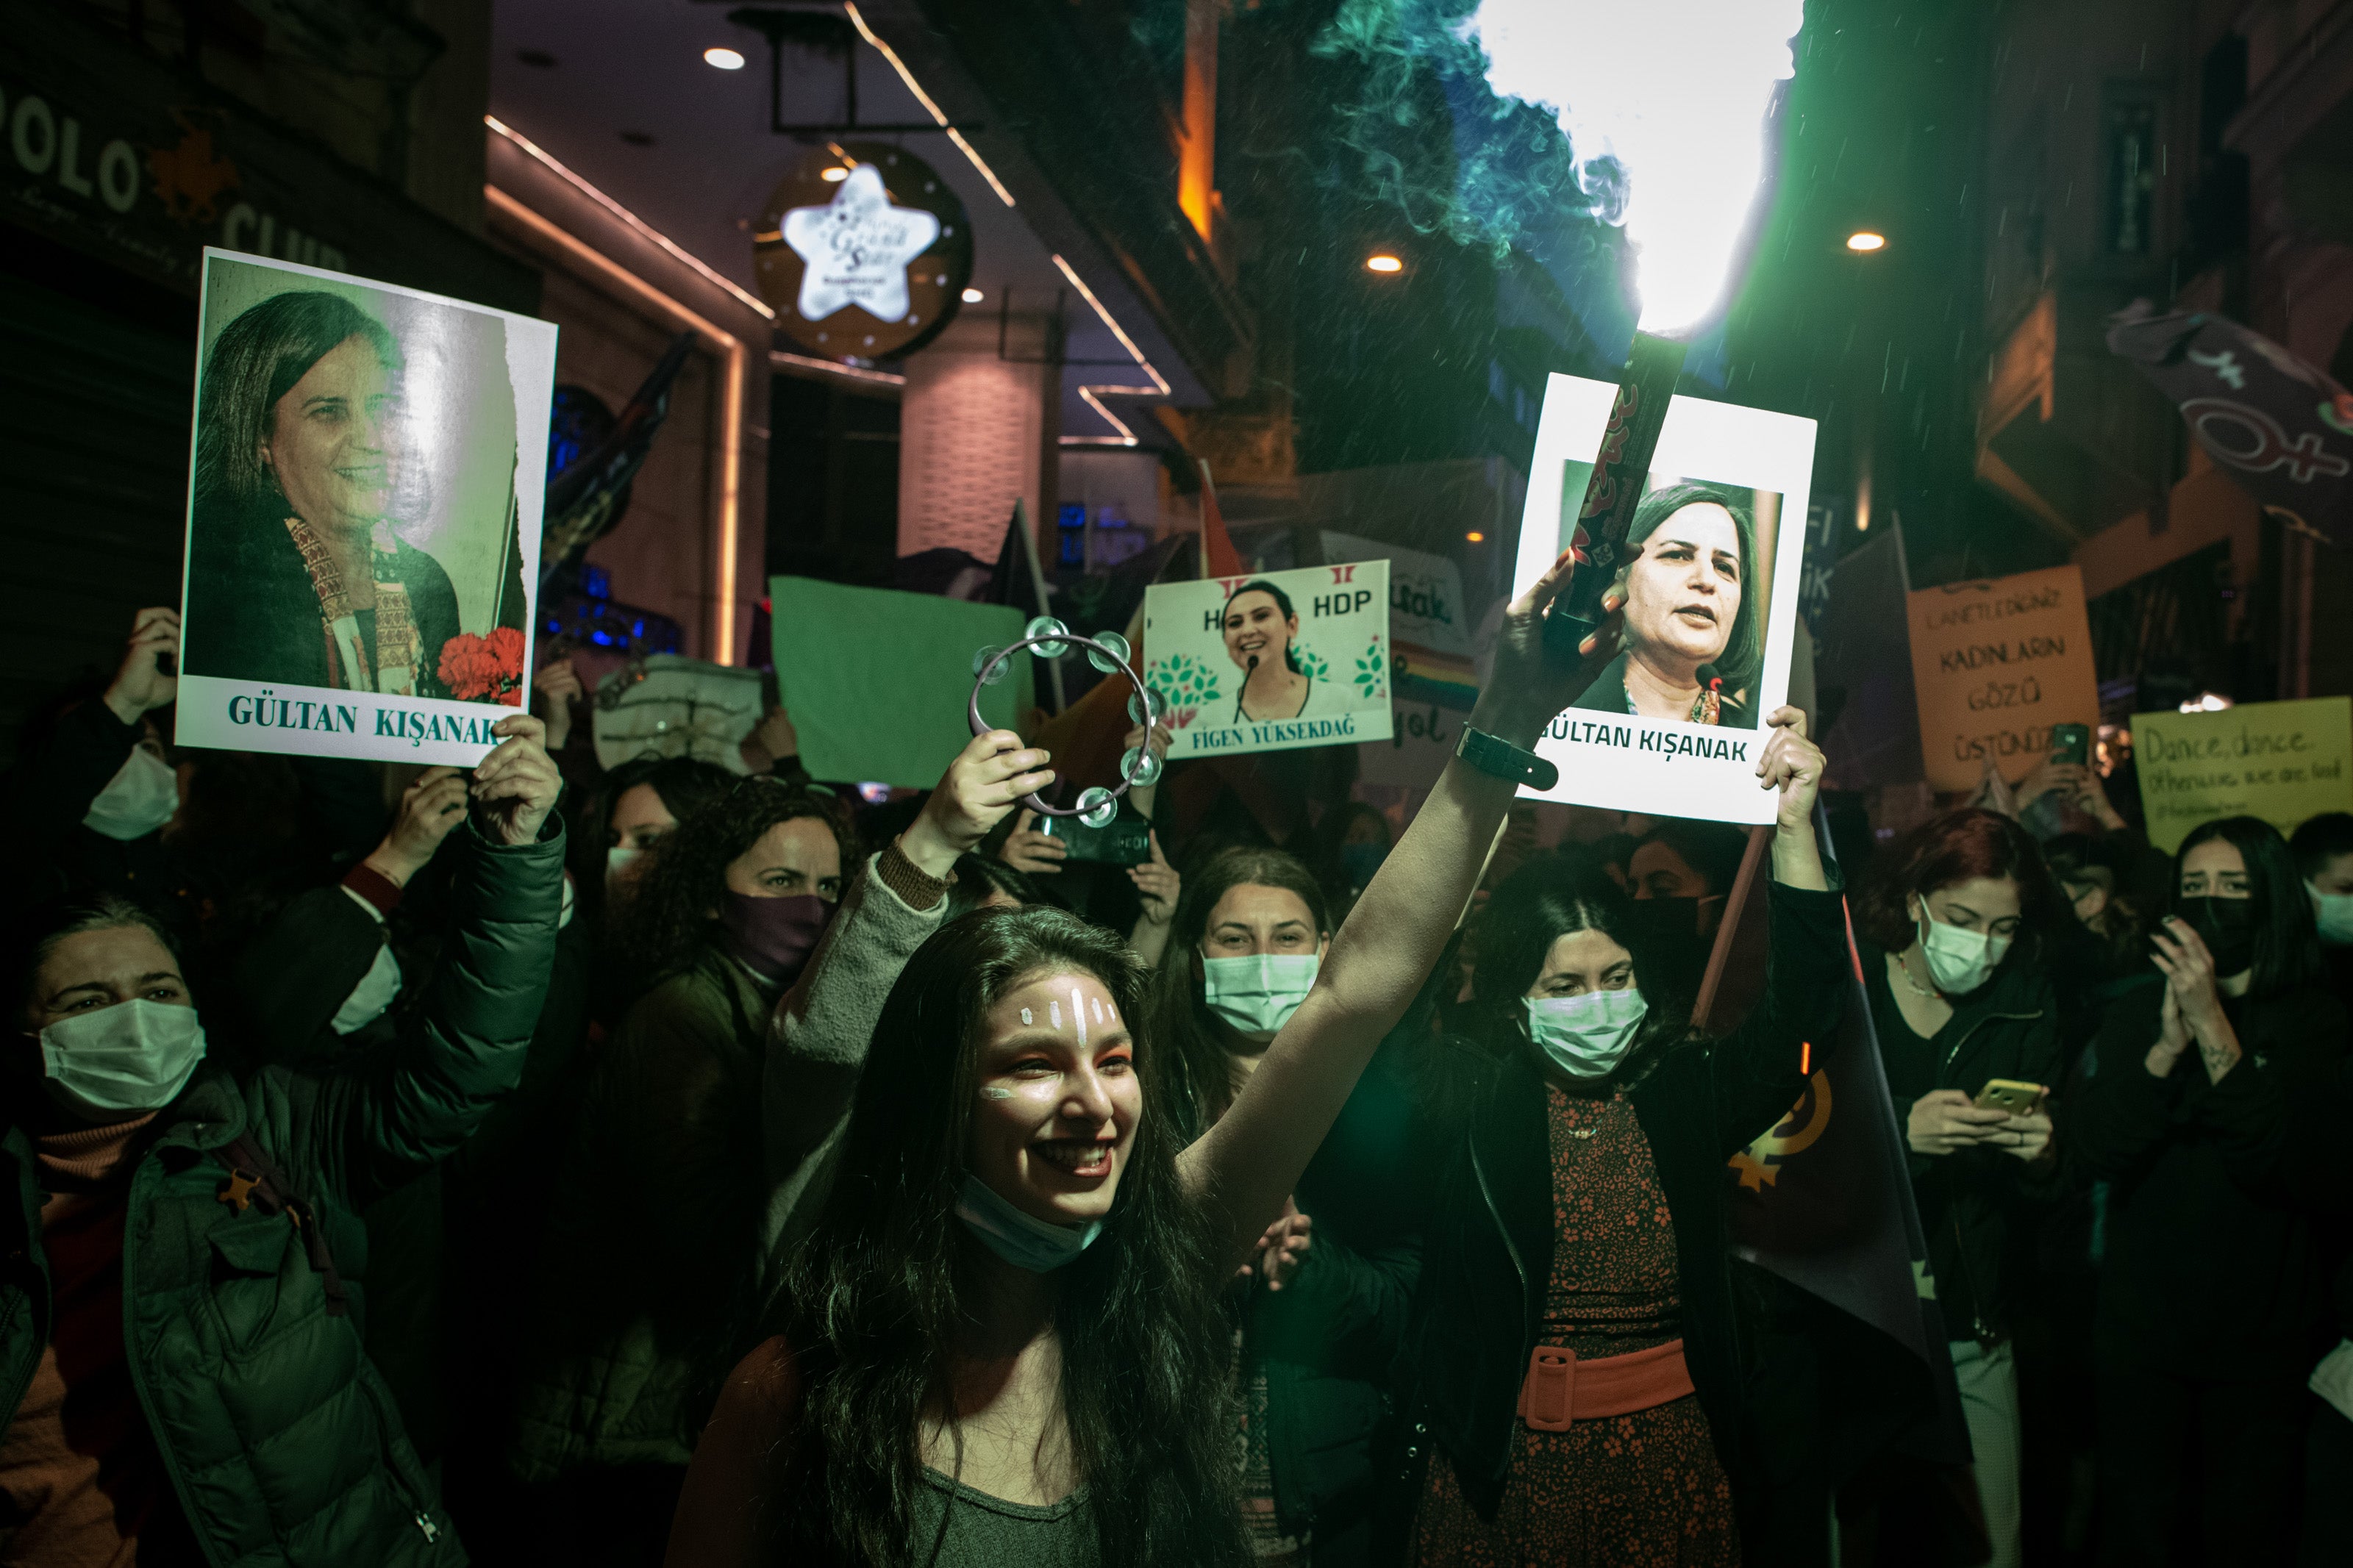 People chant slogans and sing songs during a rally for International Women’s Day on 8 March 2021 in Istanbul